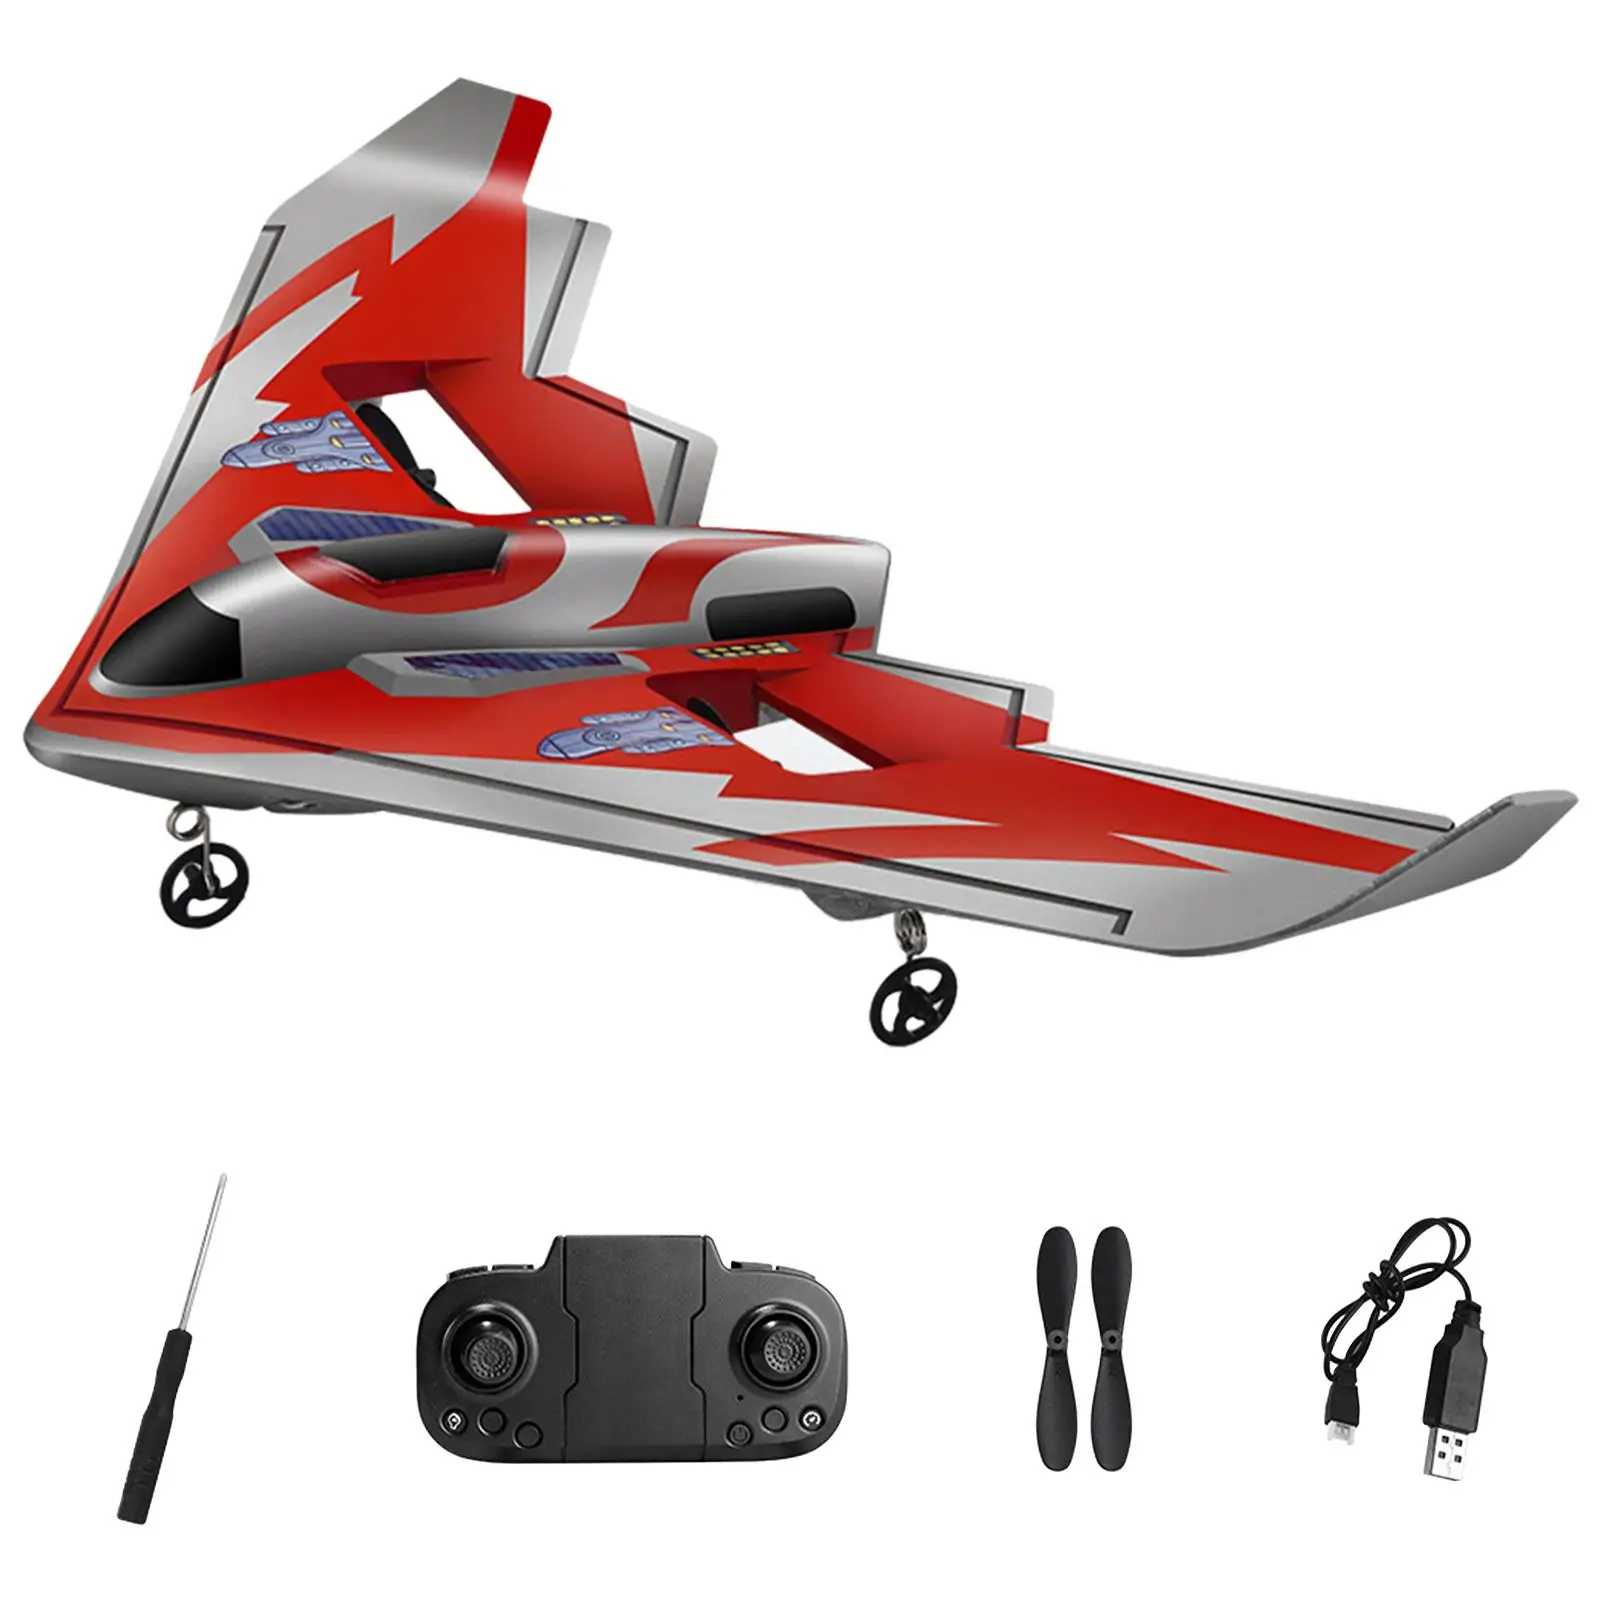 2.4GHz Toy Plane Ready to Fly Durable EPP Foam for Toddlers Beginners Adults